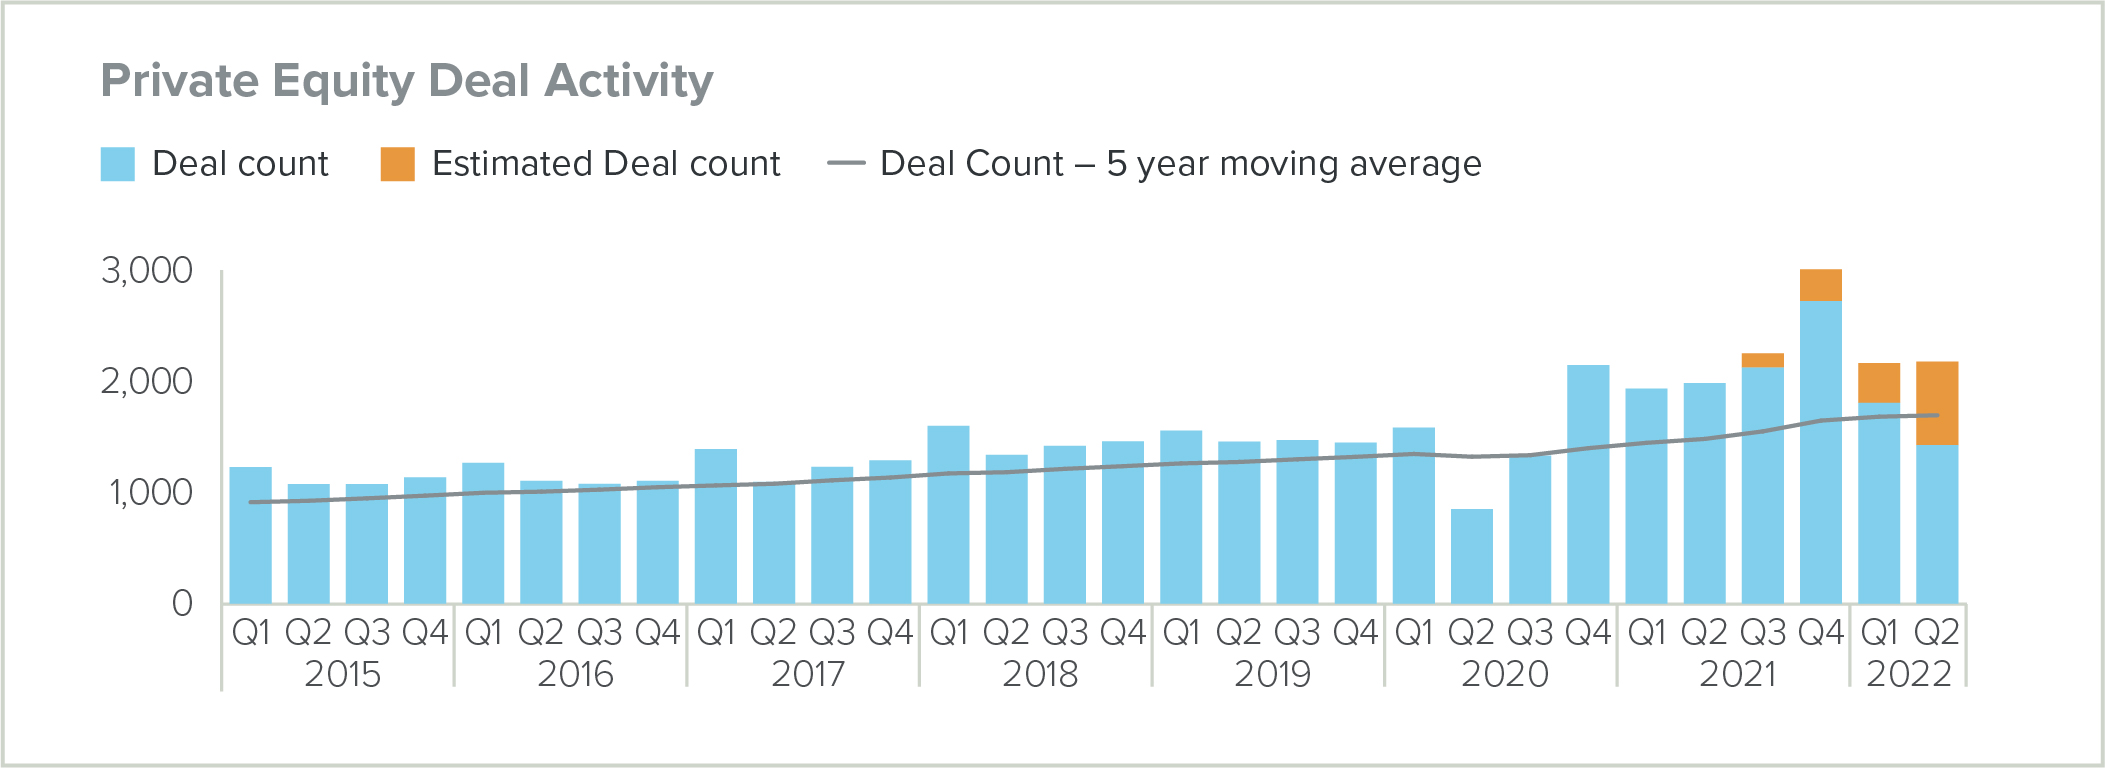 Private Equity Deal Activity